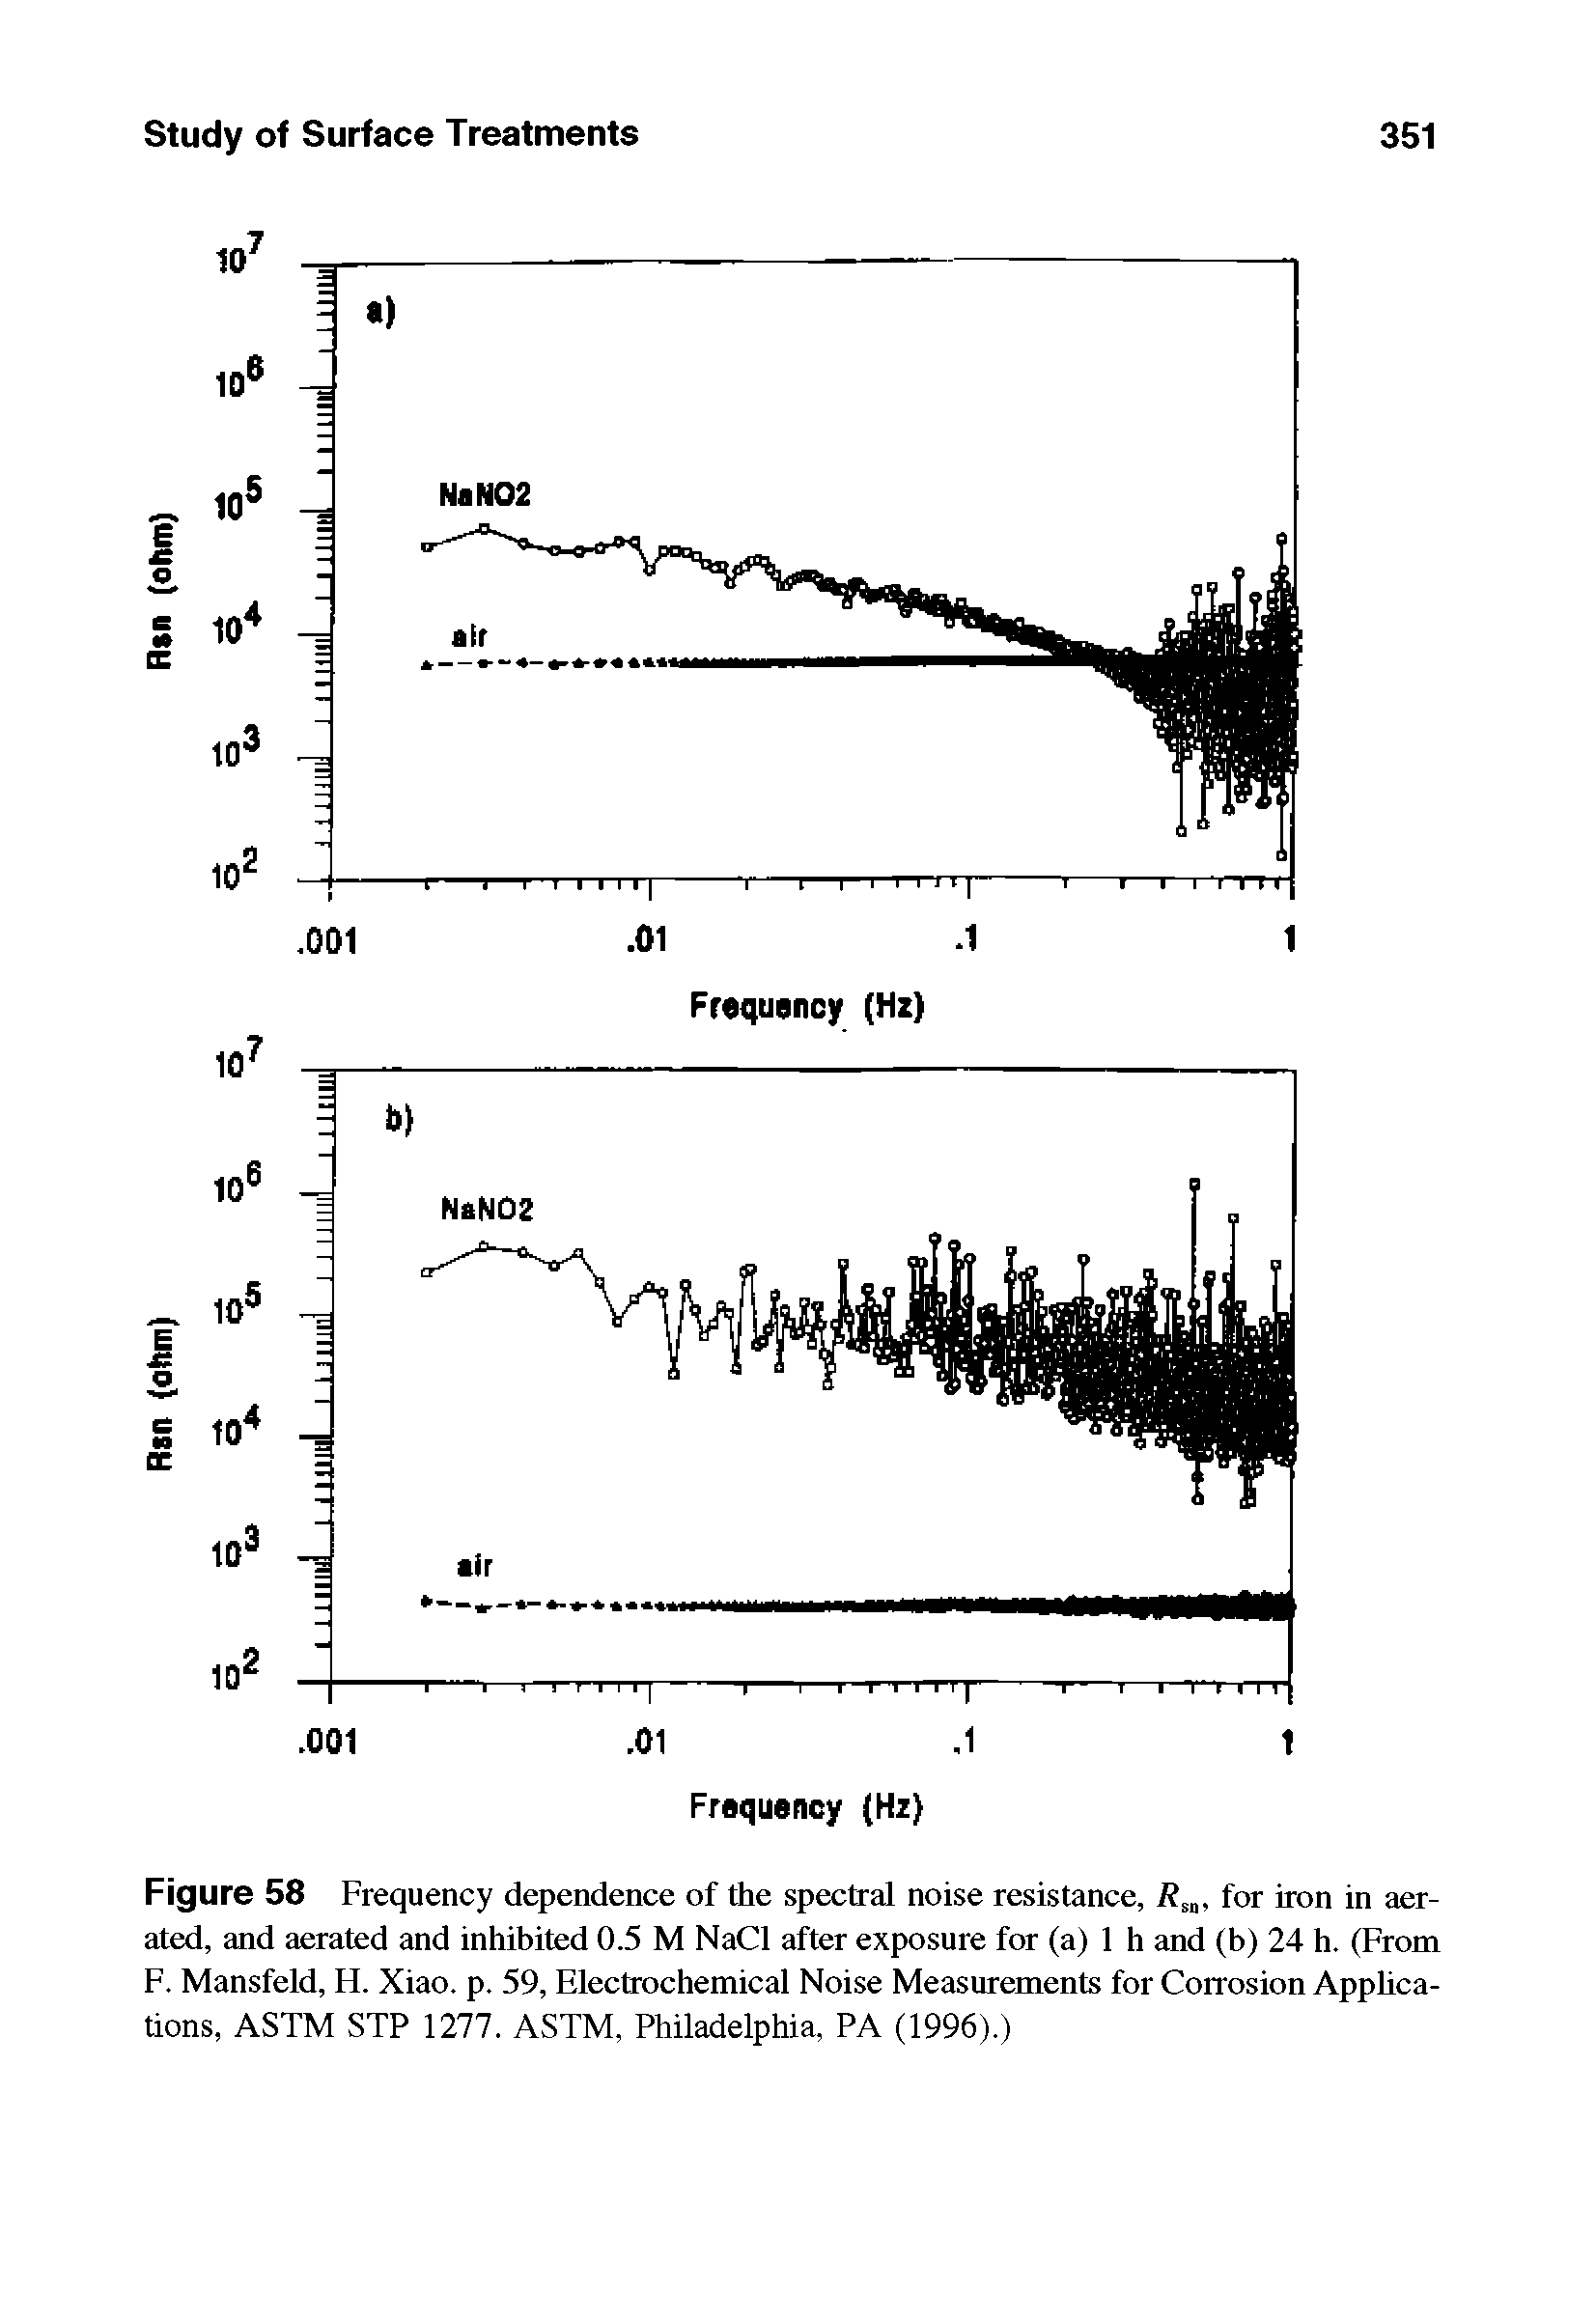 Figure 58 Frequency dependence of the spectral noise resistance, Rm, for iron in aerated, and aerated and inhibited 0.5 M NaCl after exposure for (a) 1 h and (b) 24 h. (From F. Mansfeld, H. Xiao. p. 59, Electrochemical Noise Measurements for Corrosion Applications, ASTM STP 1277. ASTM, Philadelphia, PA (1996).)...